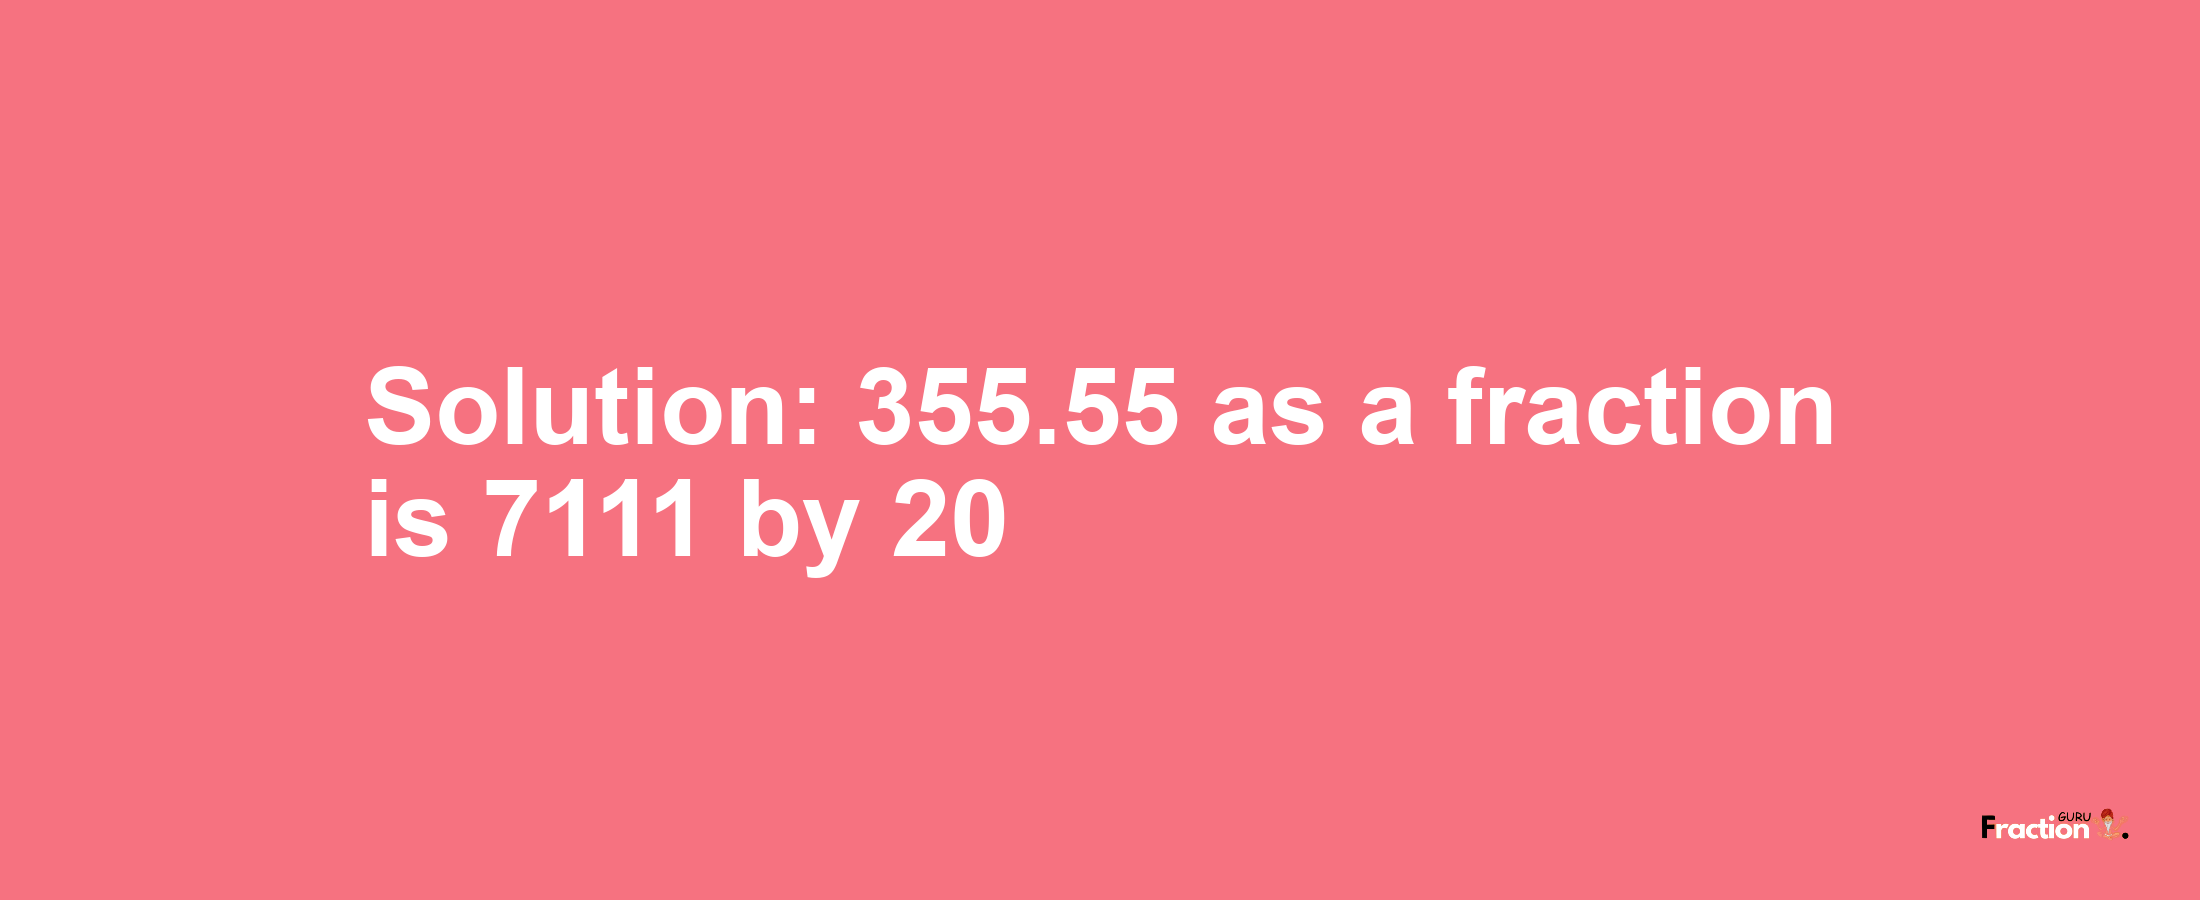 Solution:355.55 as a fraction is 7111/20